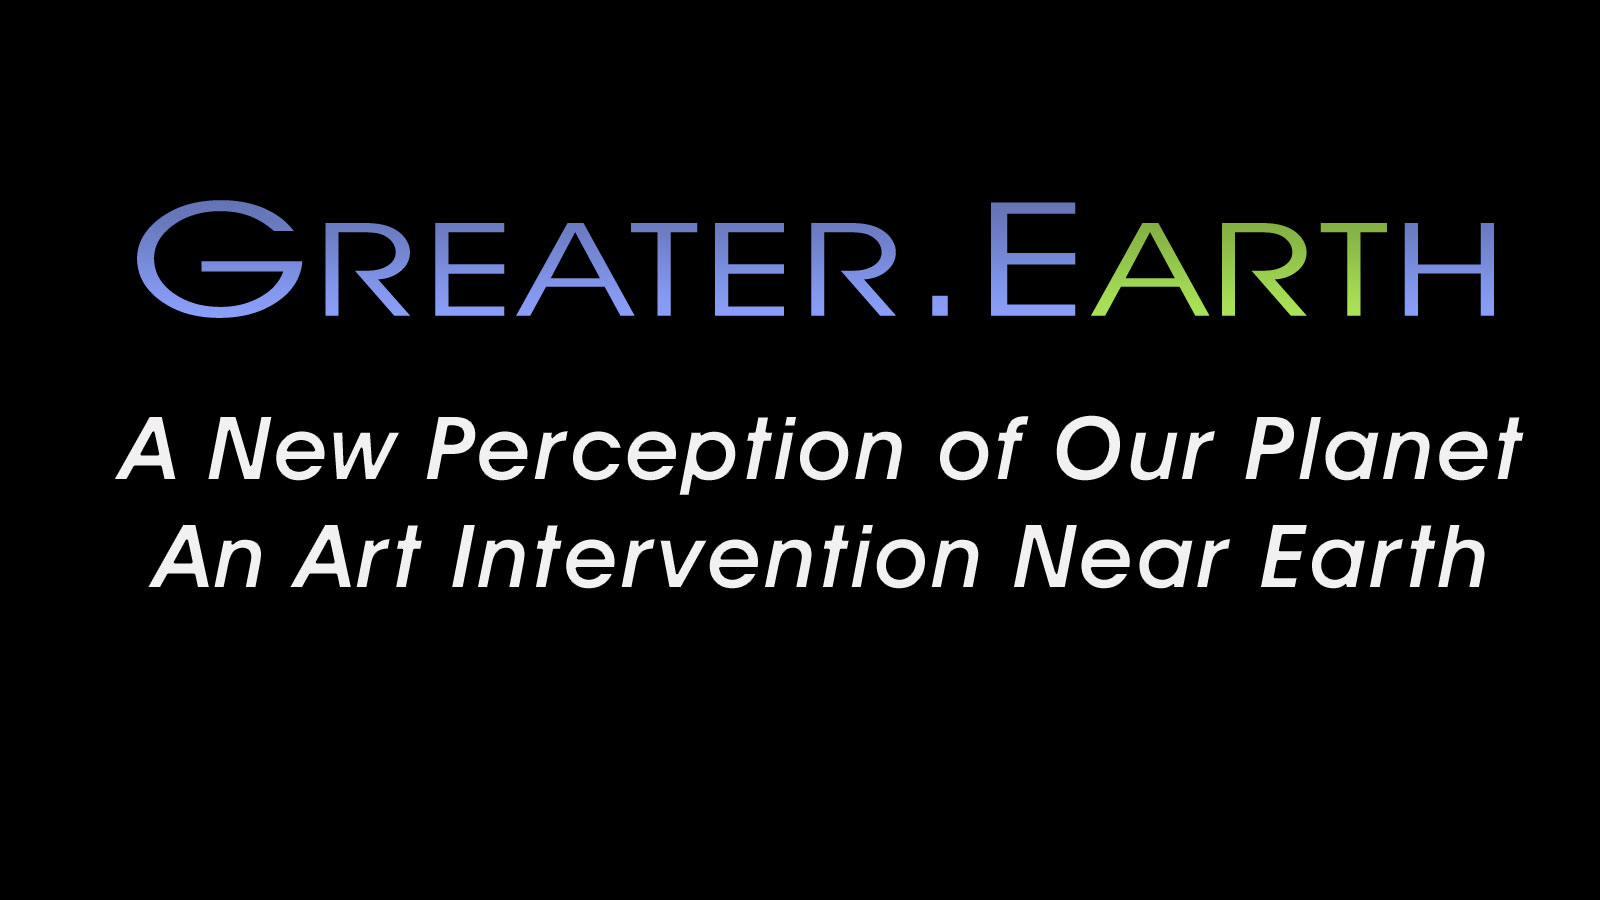 Greater Earth - A New Perception of our Planet and an Art Intervention Near Earth